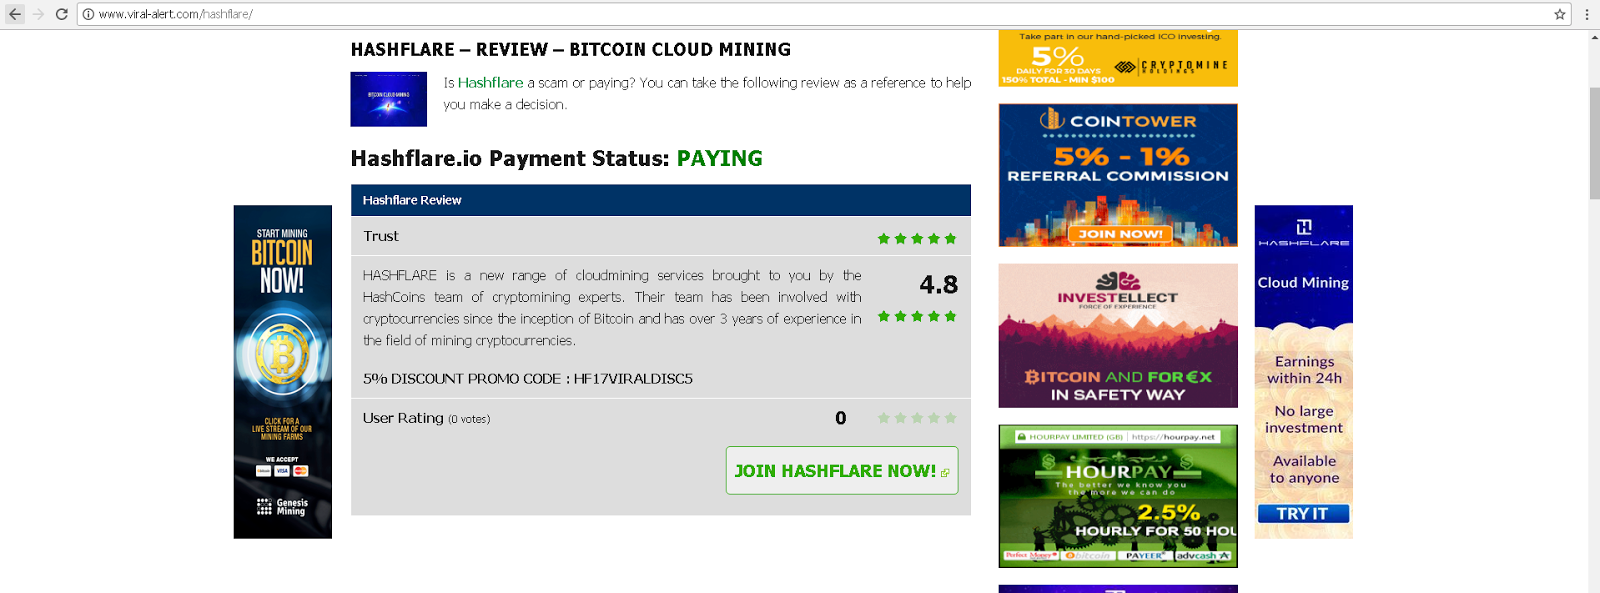 Hashflare 10 Discount Code Most Trusted Cloud Mining Sites Soundforce - 